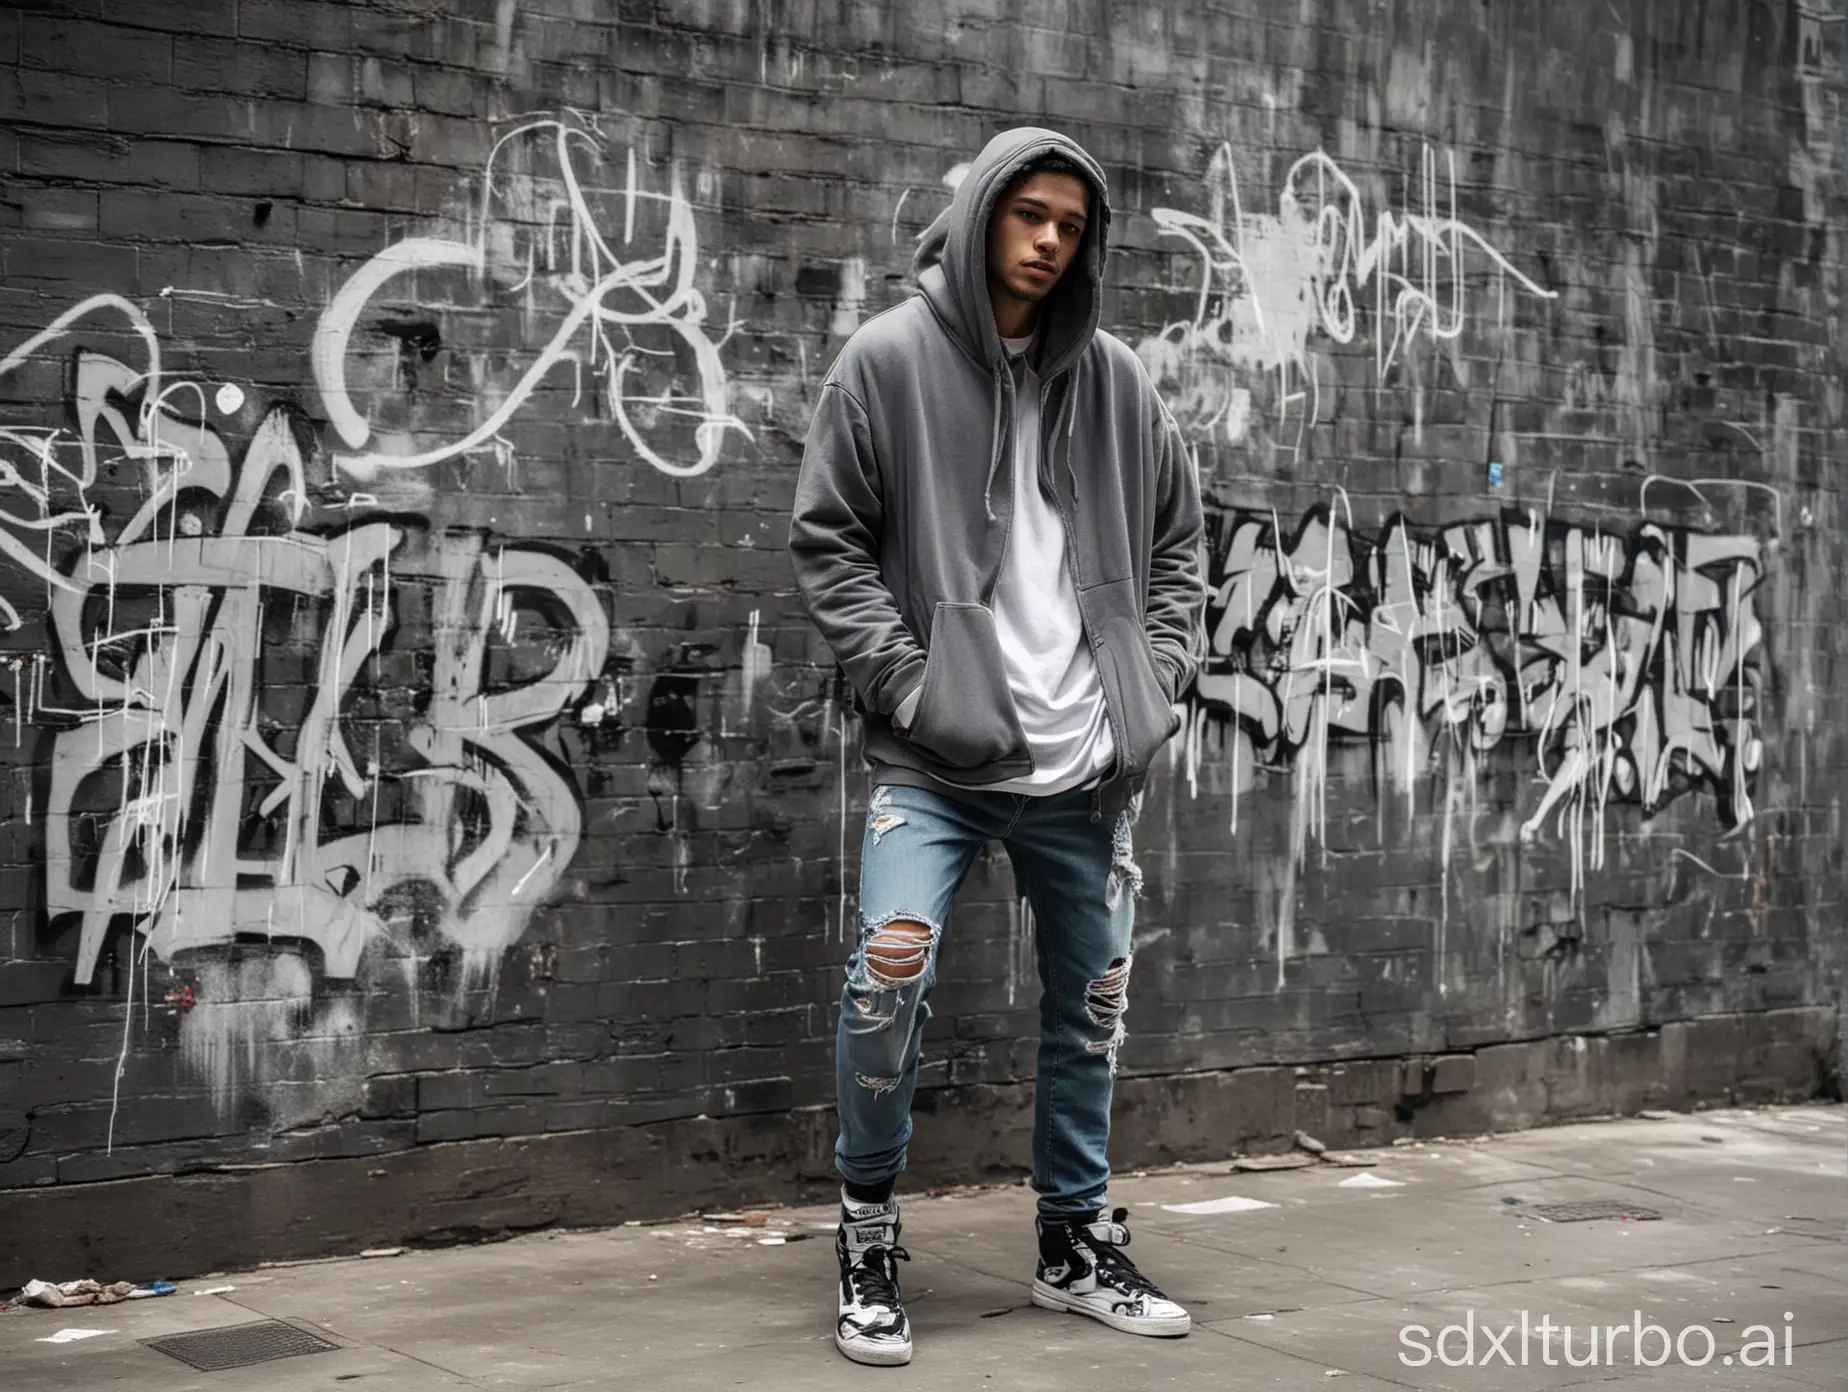 A man wearing an oversized hoodie with distressed jeans and high-top sneakers, set against a graffiti-covered wall.